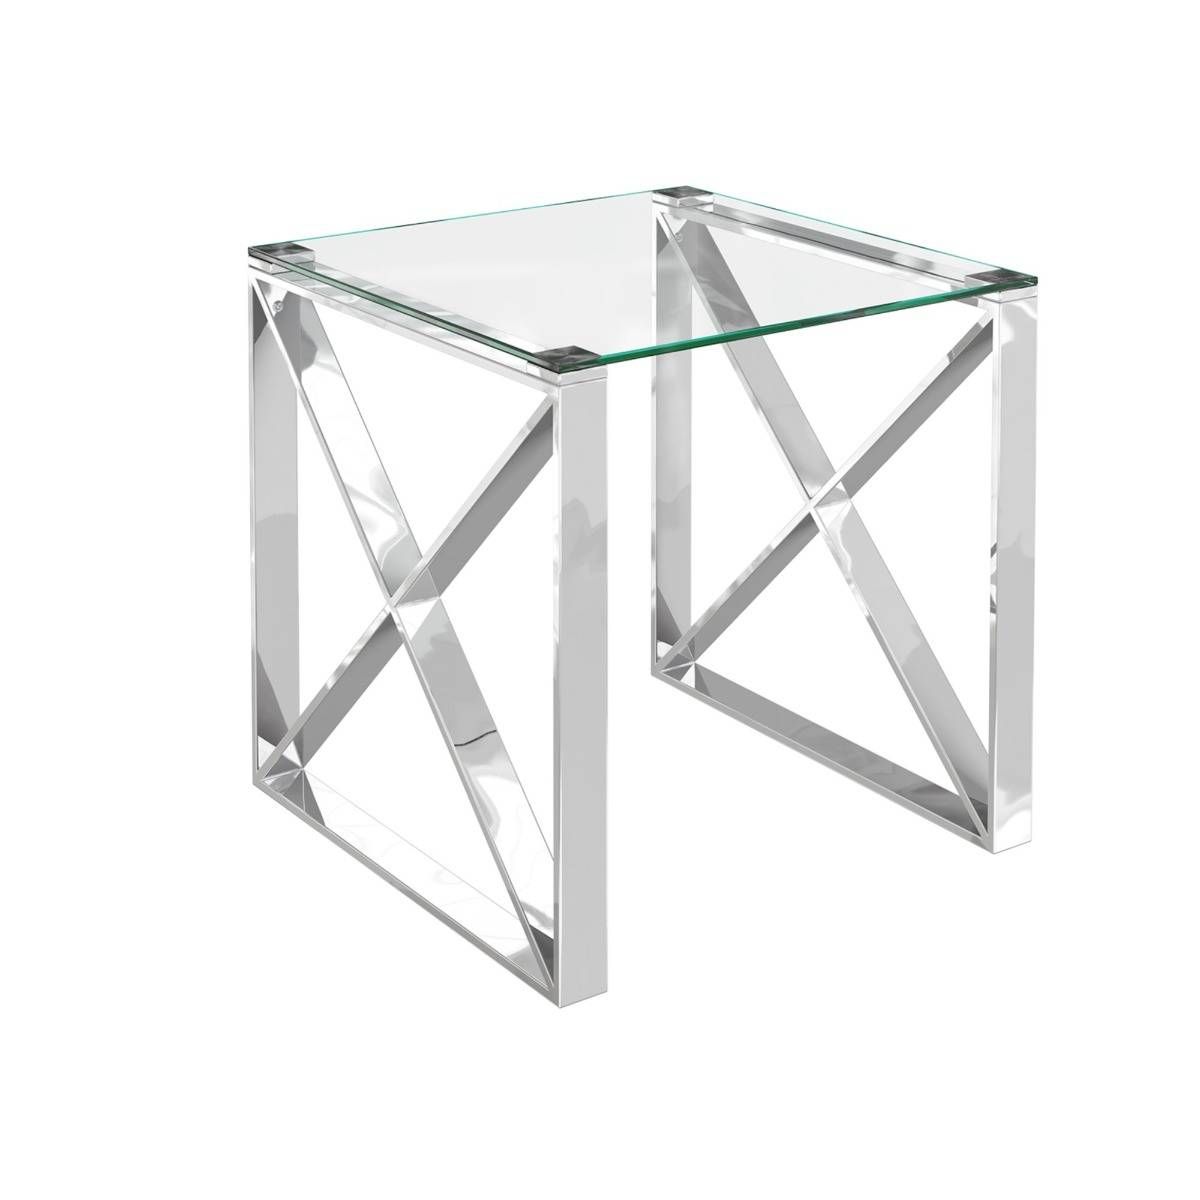 Fashionable Polished Chrome Round Cocktail Tables Intended For Maxi Polished Chrome And Glass Side Table (Gallery 20 of 20)